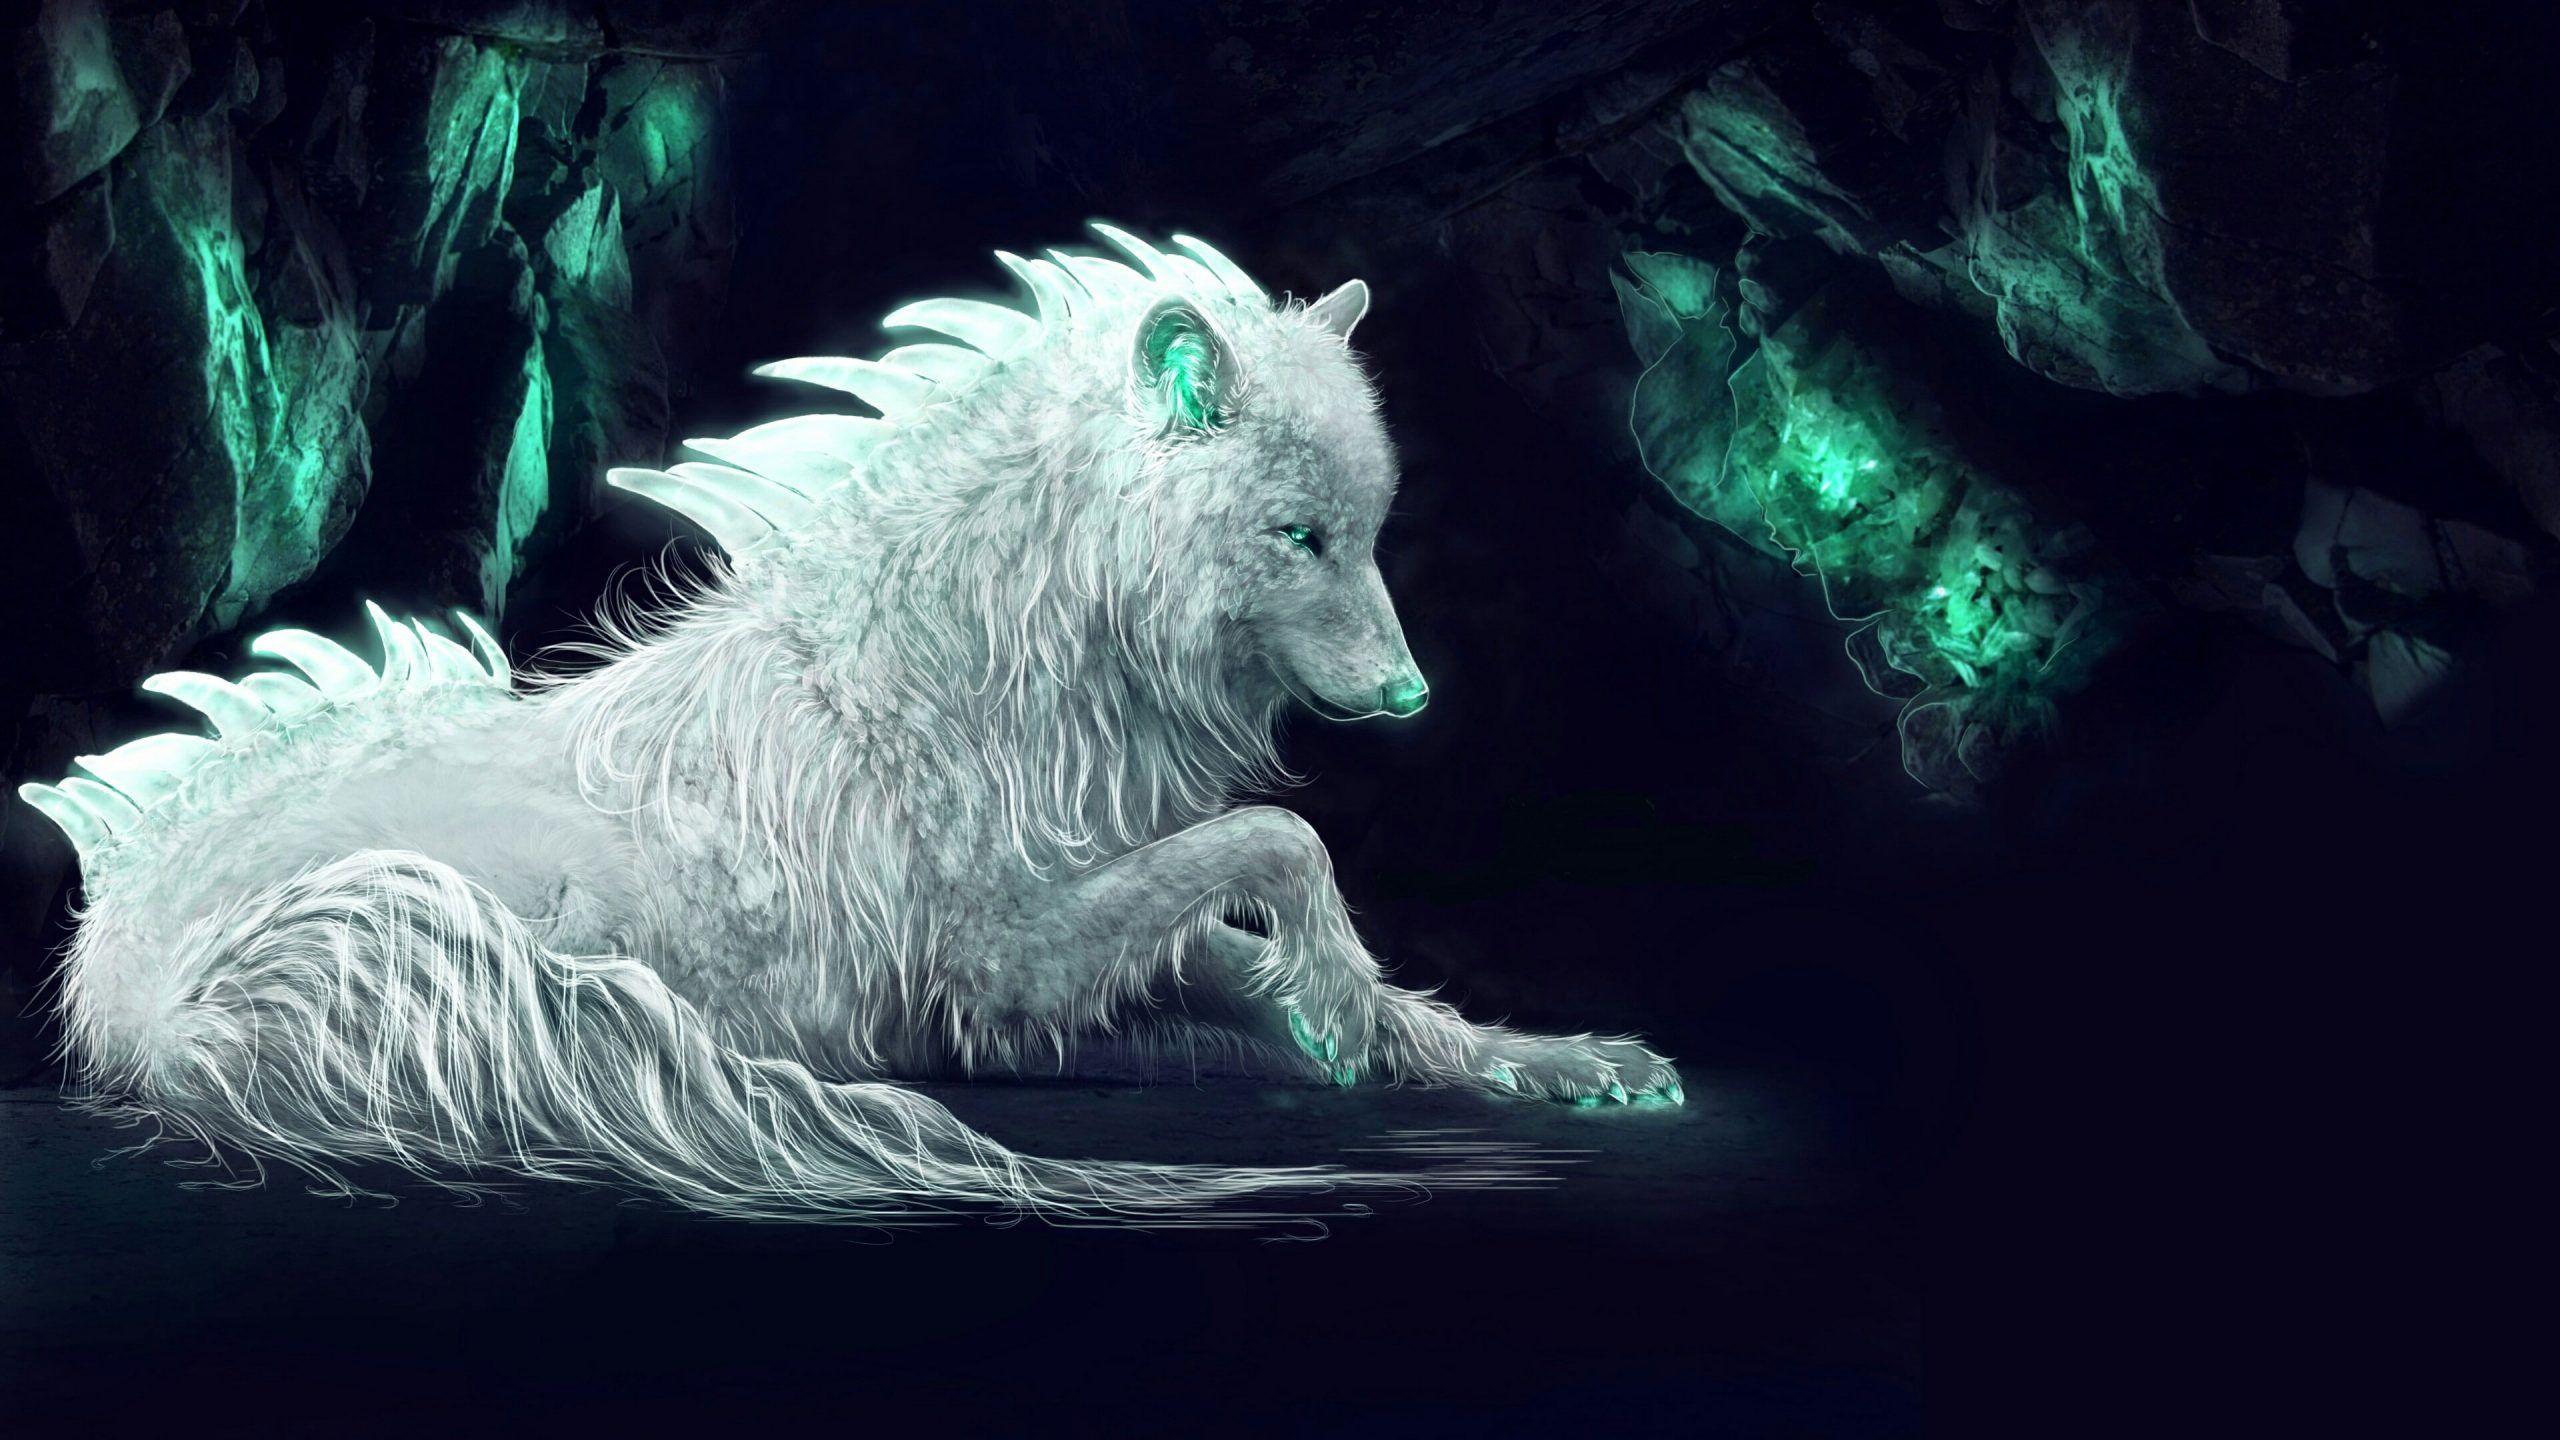 Darkness wallpaper, wolf, white wolf, fantasy art, imagination, mythical creature • Wallpaper For You HD Wallpaper For Desktop & Mobile